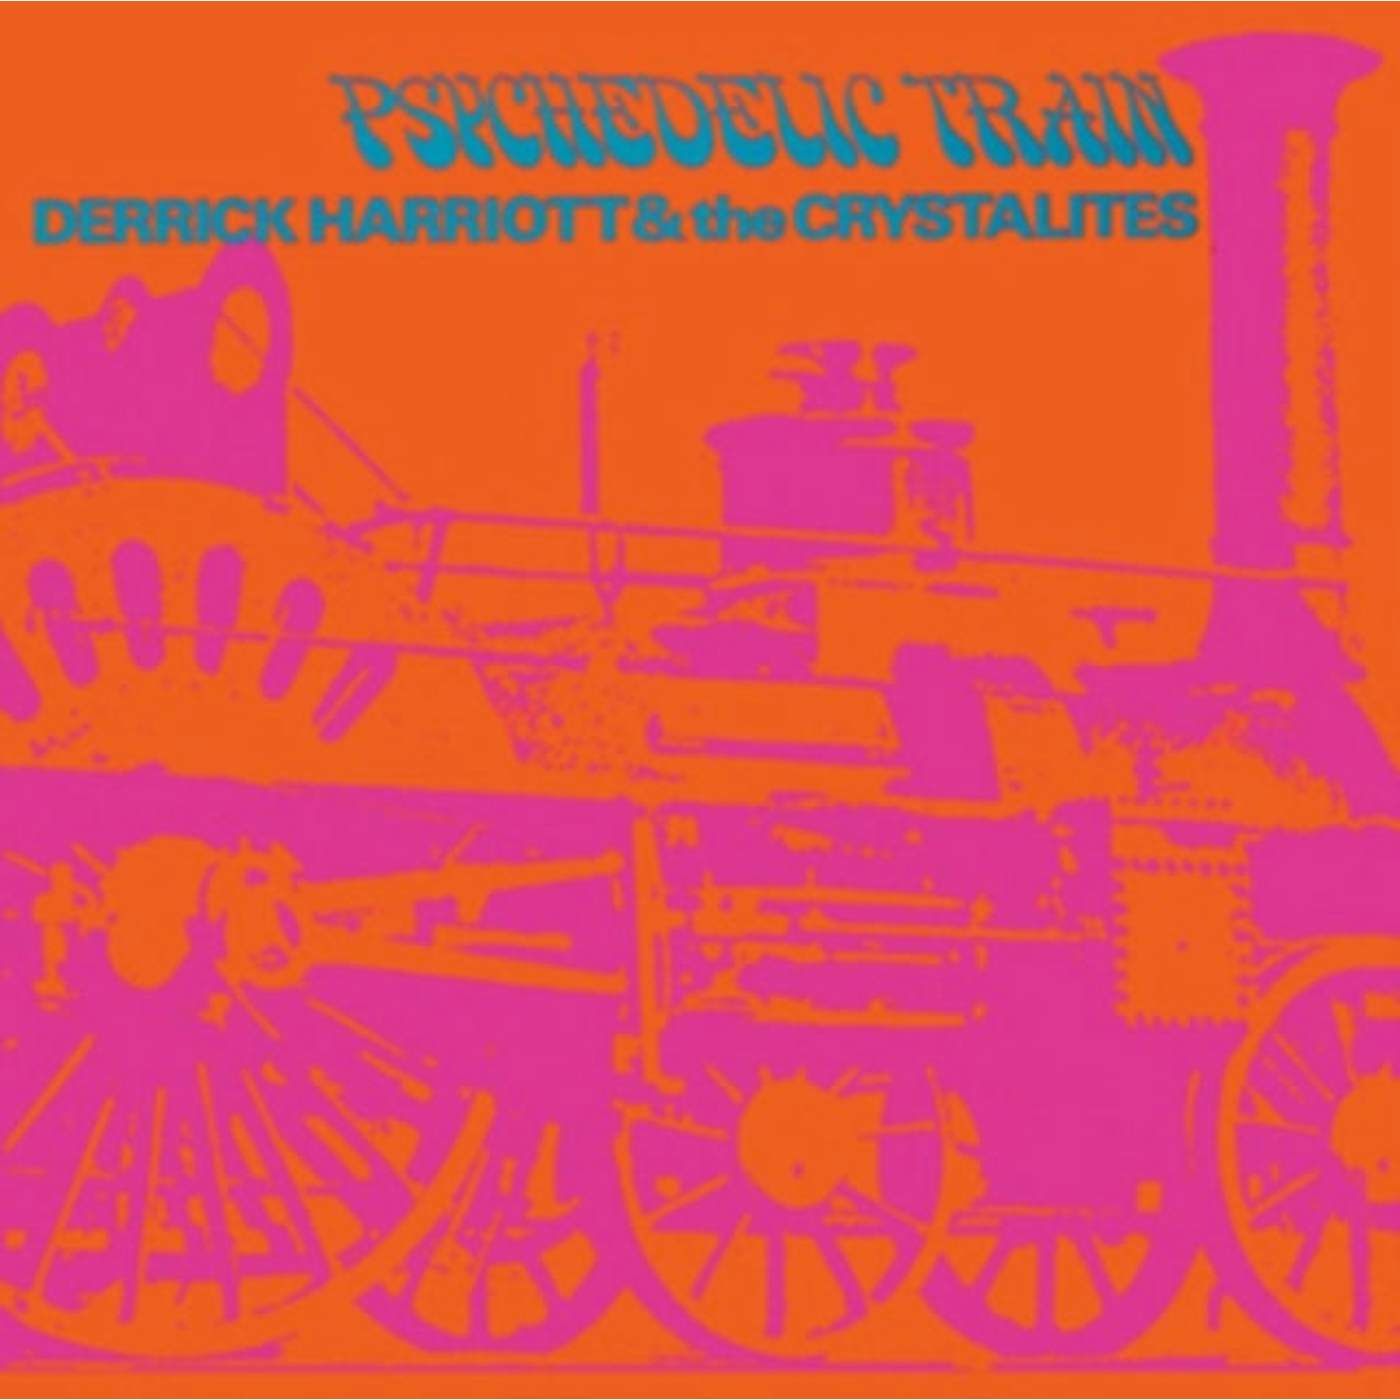 Derrick Harriott & The Crystalites CD - Psychedelic Train (Expanded Edition)